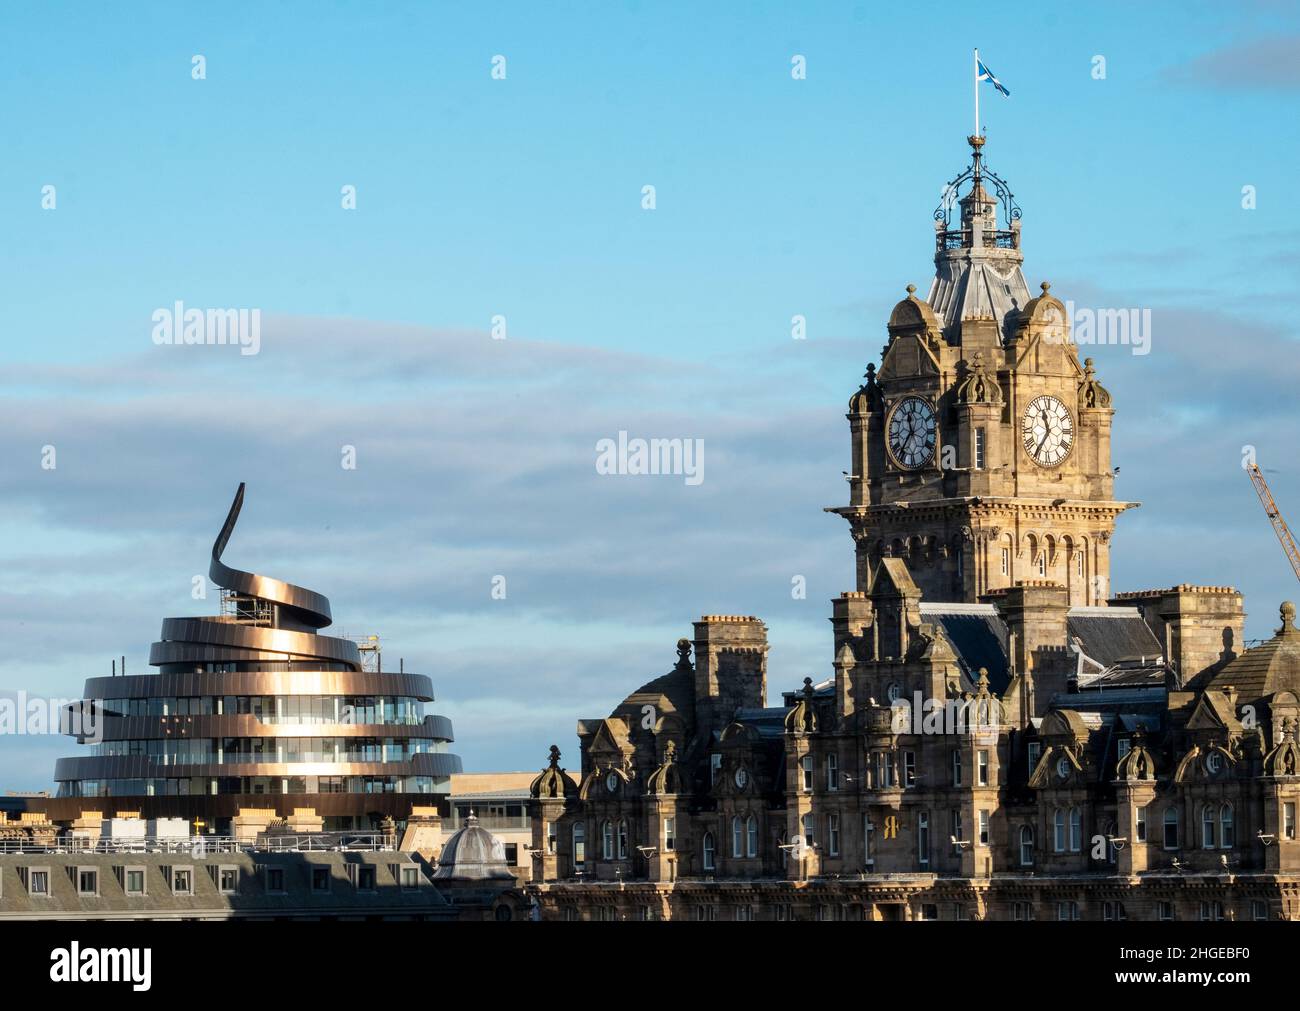 View of the Edinburgh skyline with the new St James centre hotel and the Balmoral hotel clock tower to the right. Stock Photo